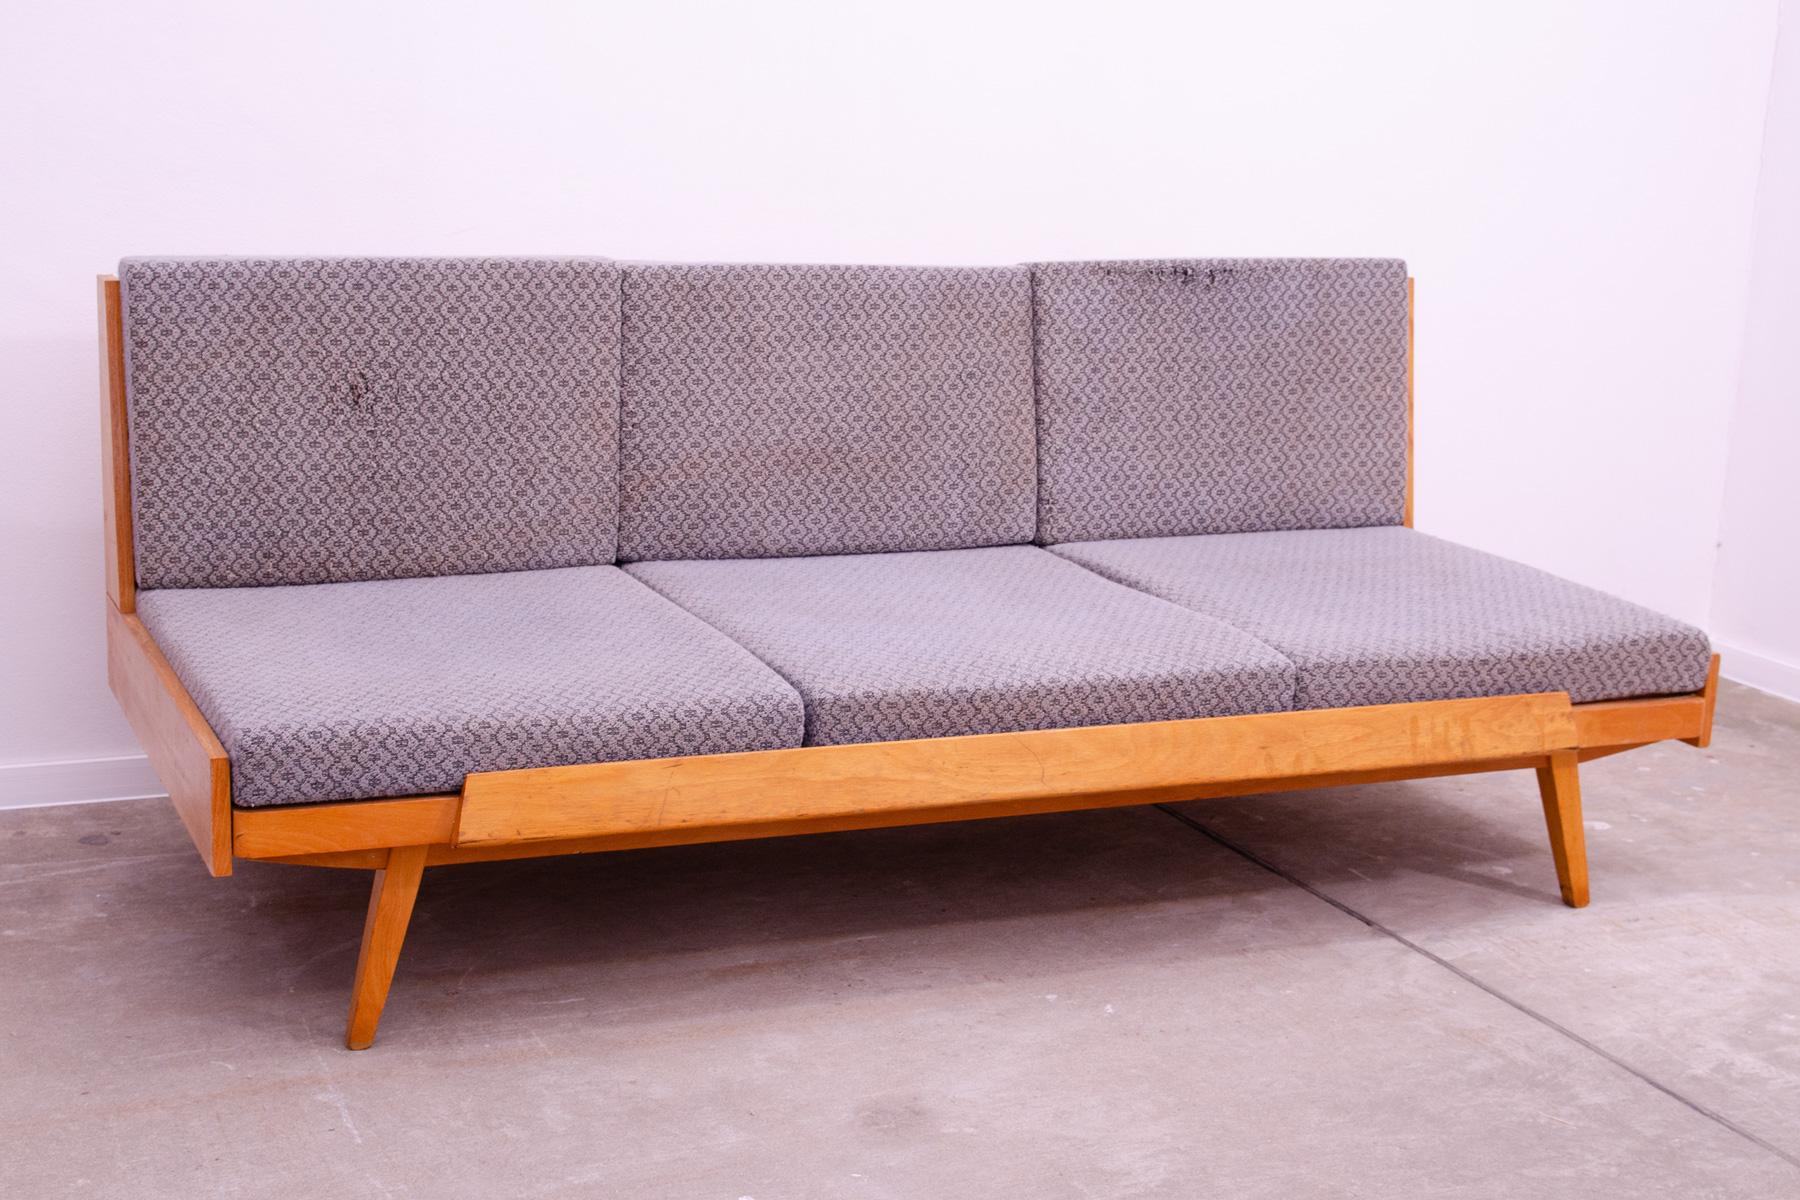 Mid century sofa bed,made in the former Czechoslovakia in the 1970´s. The sofa is made of beechwood, it´s in good structure condition, the fabric shows significant signs of age and using and needs to be reupholstered.

Lenght:     199 cm

Height:   